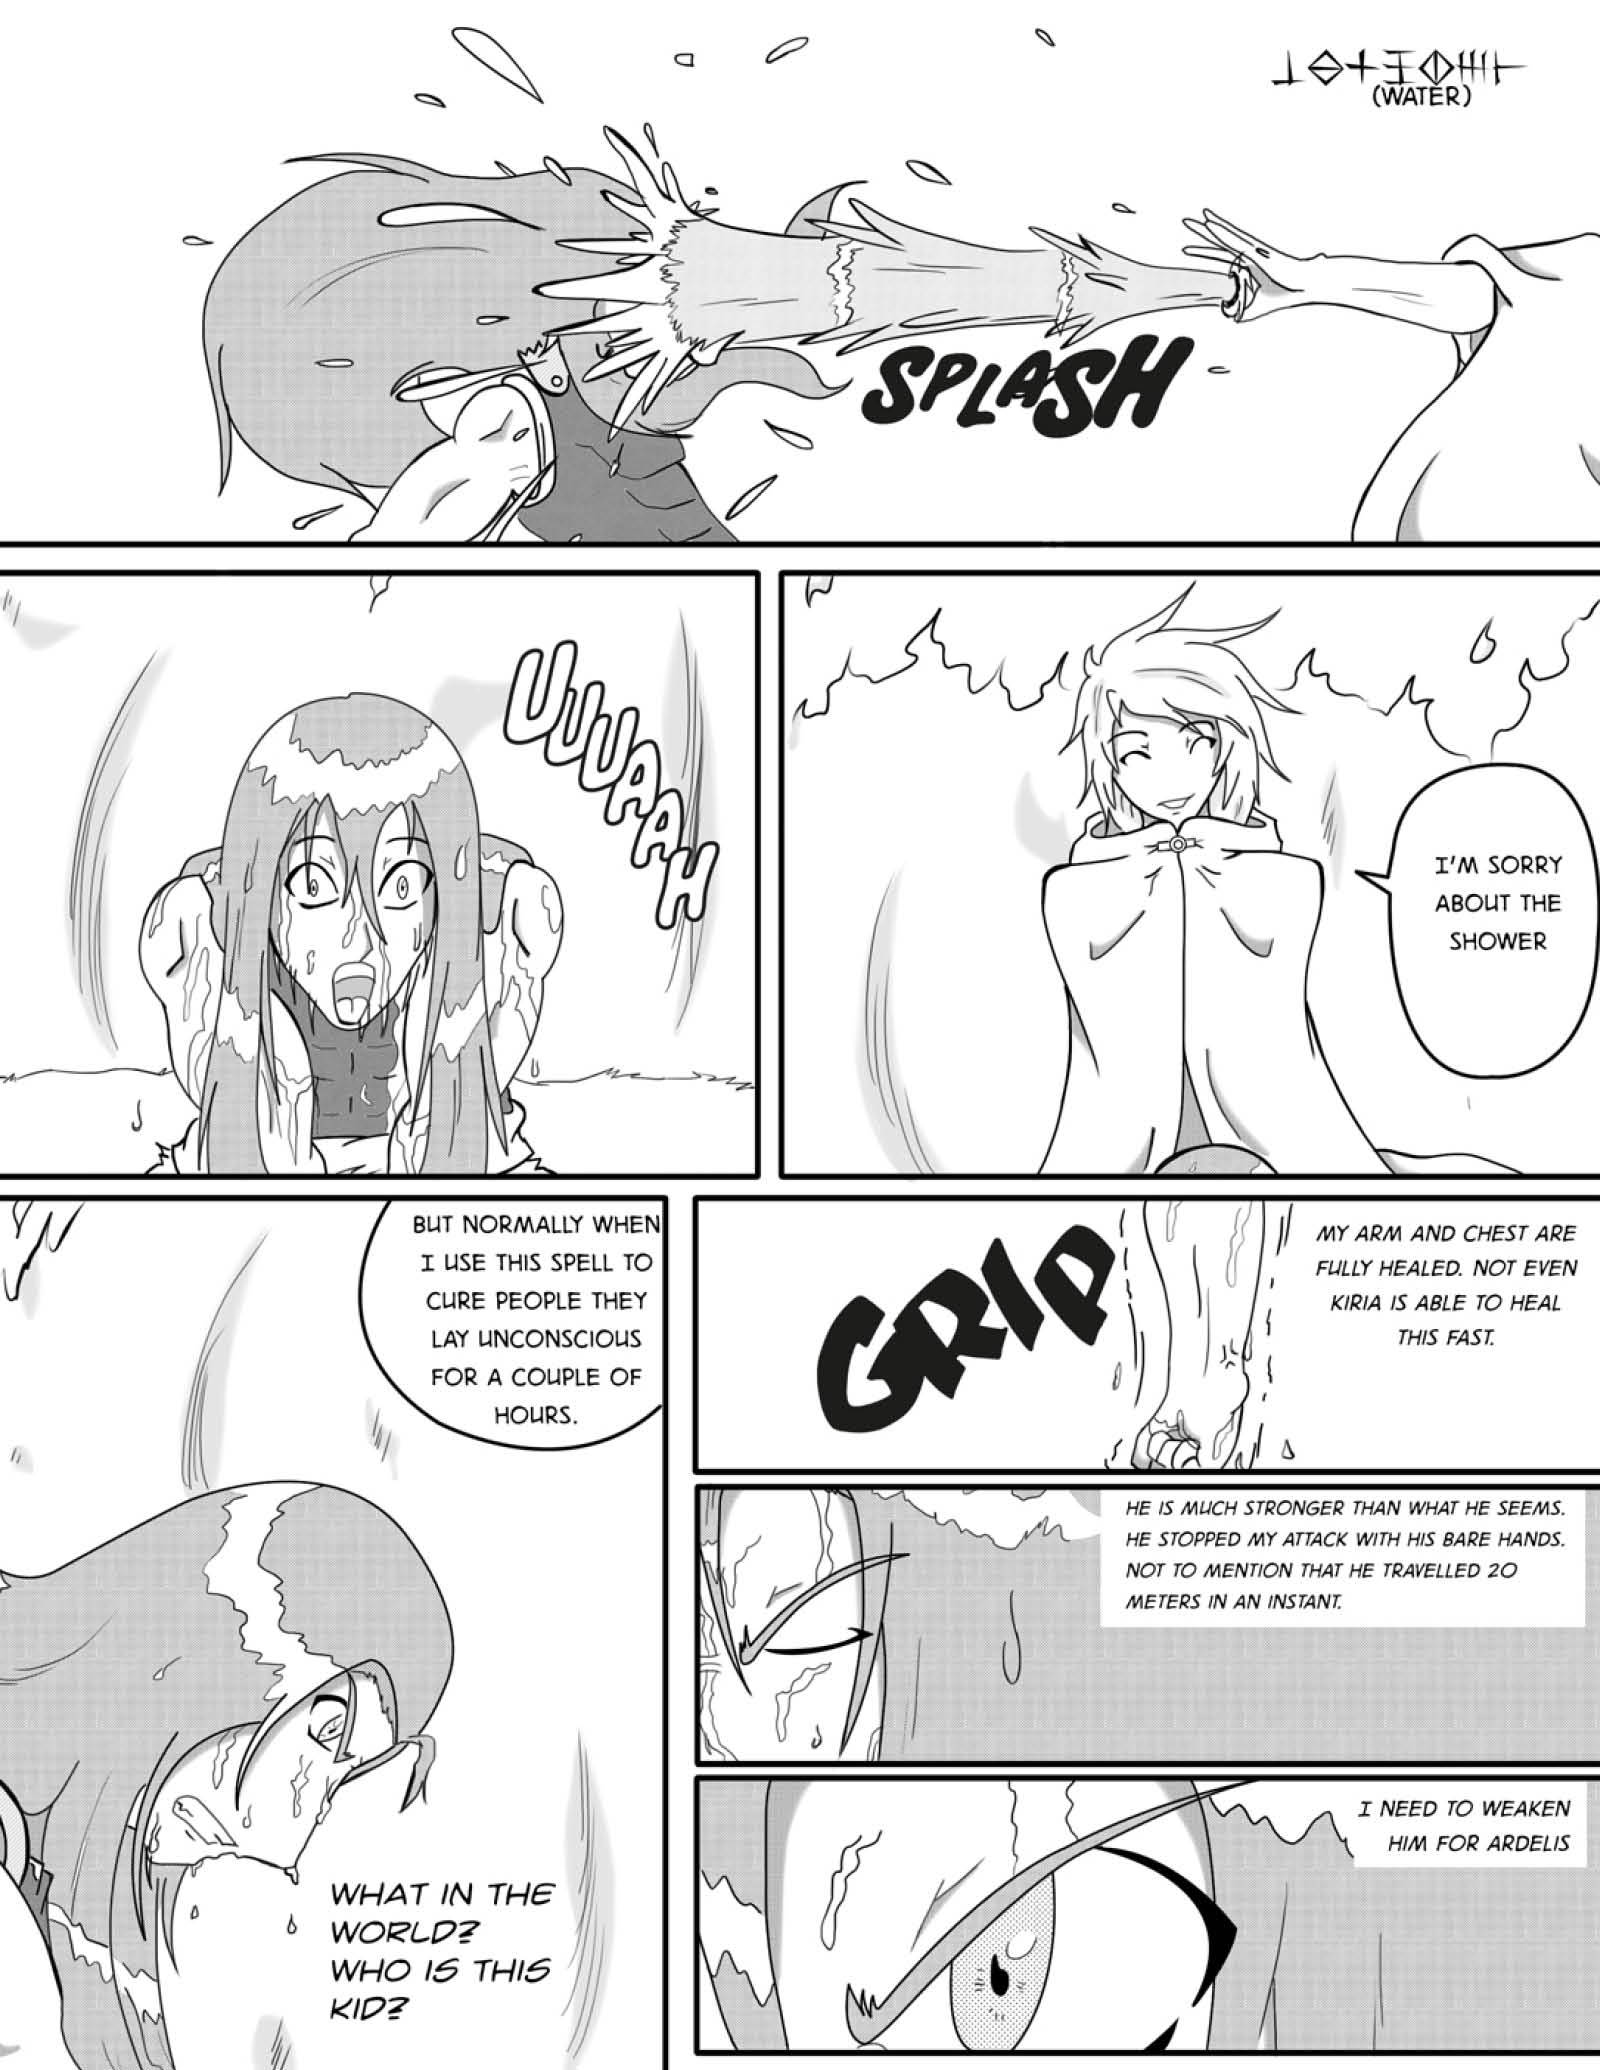 Series Dilan: the Chronicles of Covak - Chapter 3 - Page 6 - Language ENG